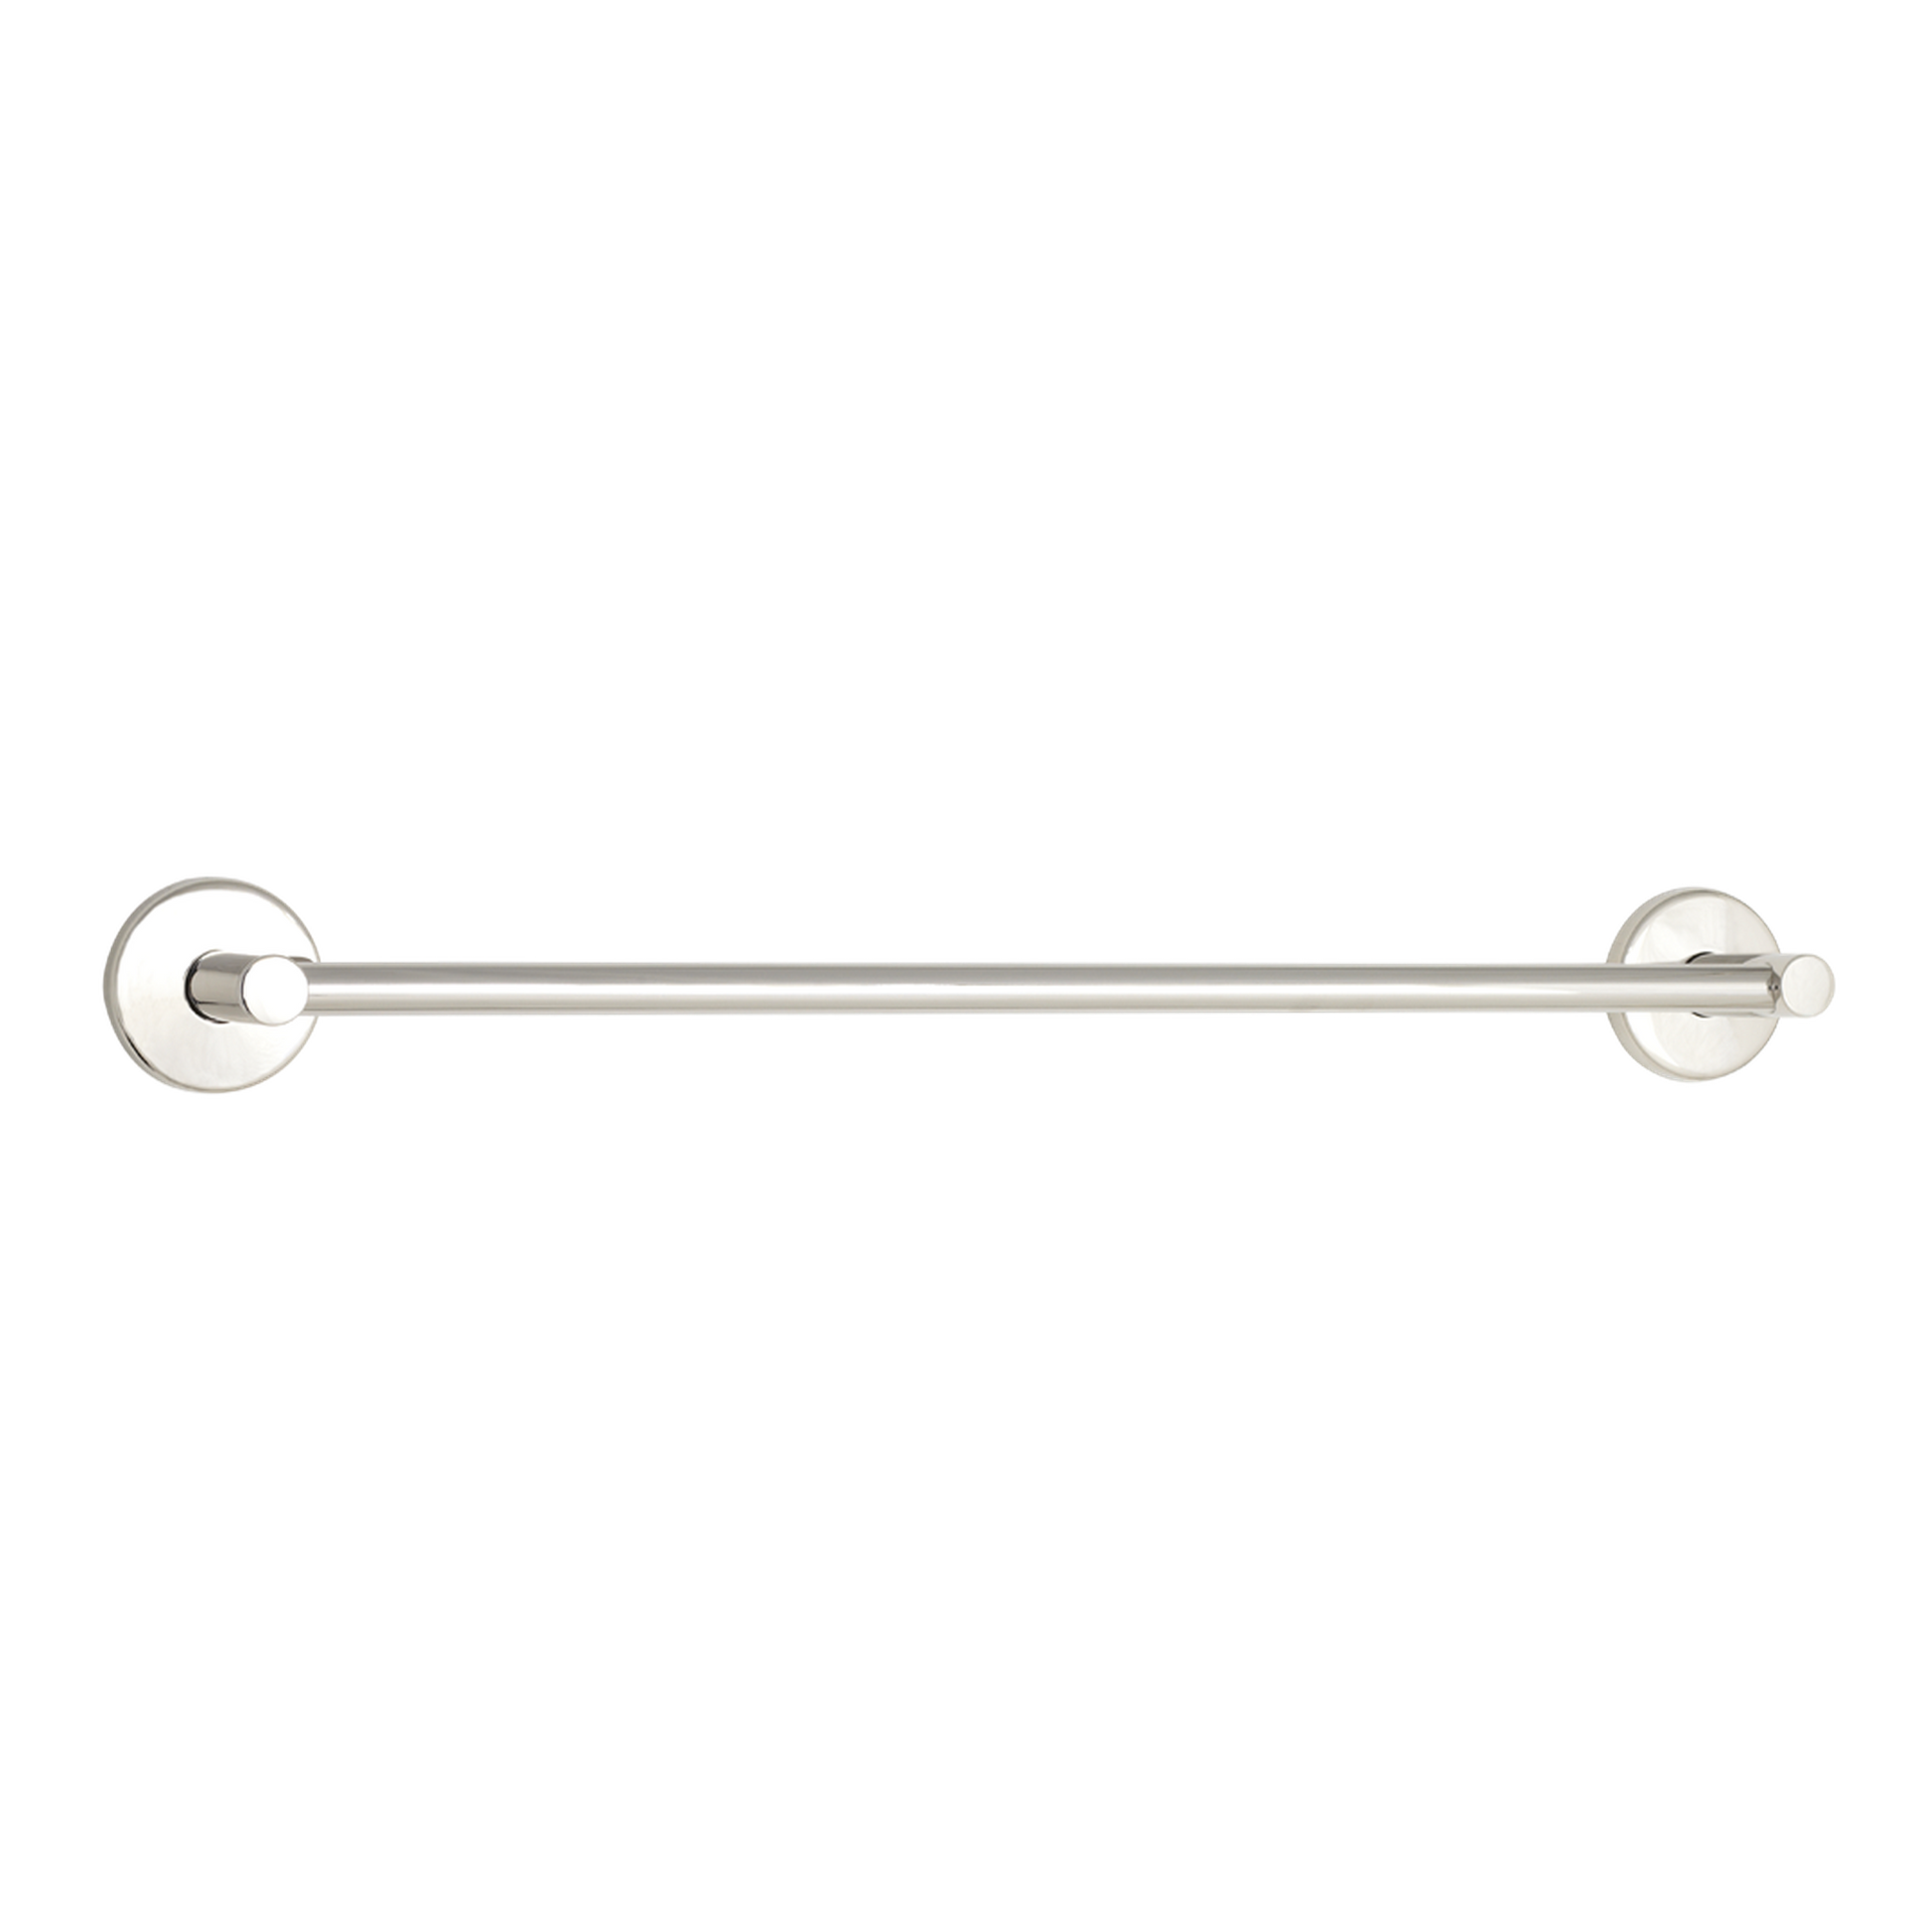 Seachrome Conorado Series 30" Satin Stainless Steel Concealed Mounting Flange Single Towel Bar